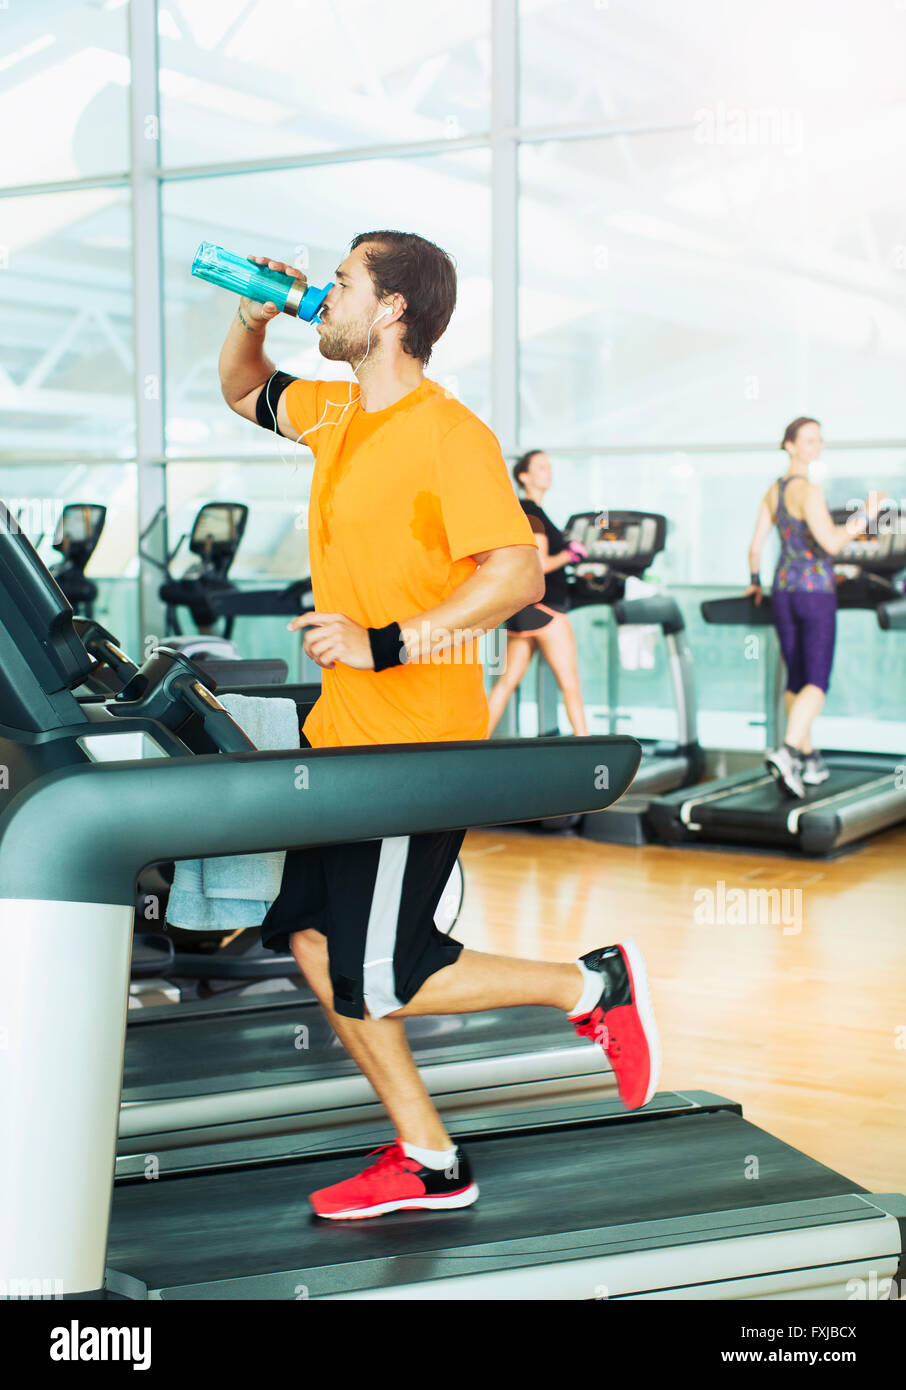 Man drinking water and running on treadmill at gym Stock Photo